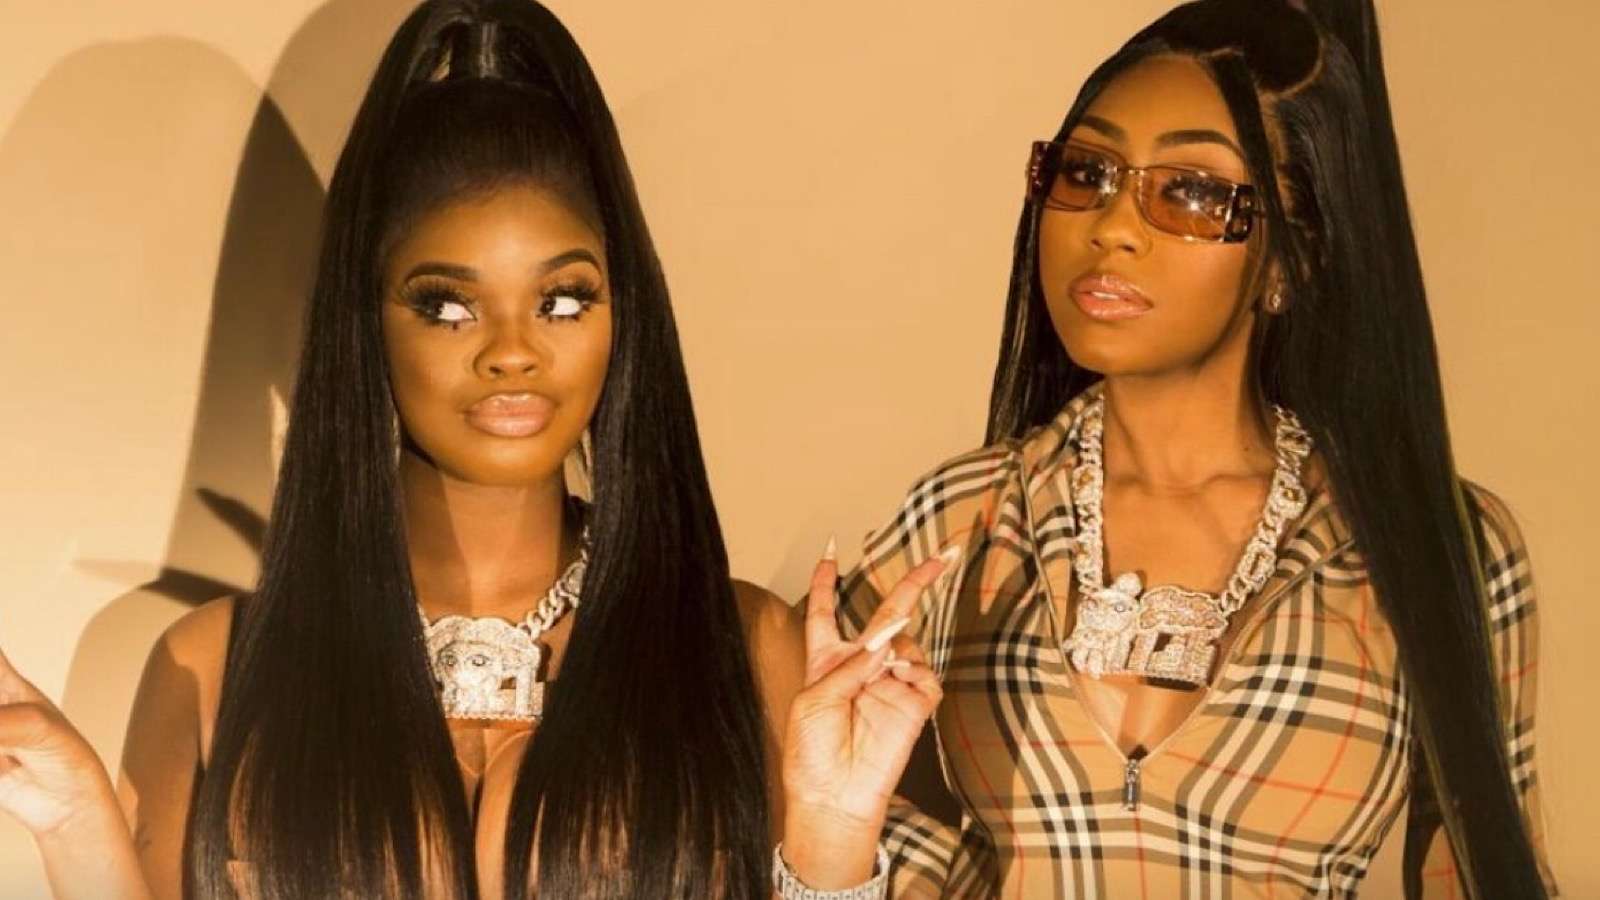 City Girls settle their spat after Yung Miami calls JT out for “sneak ...